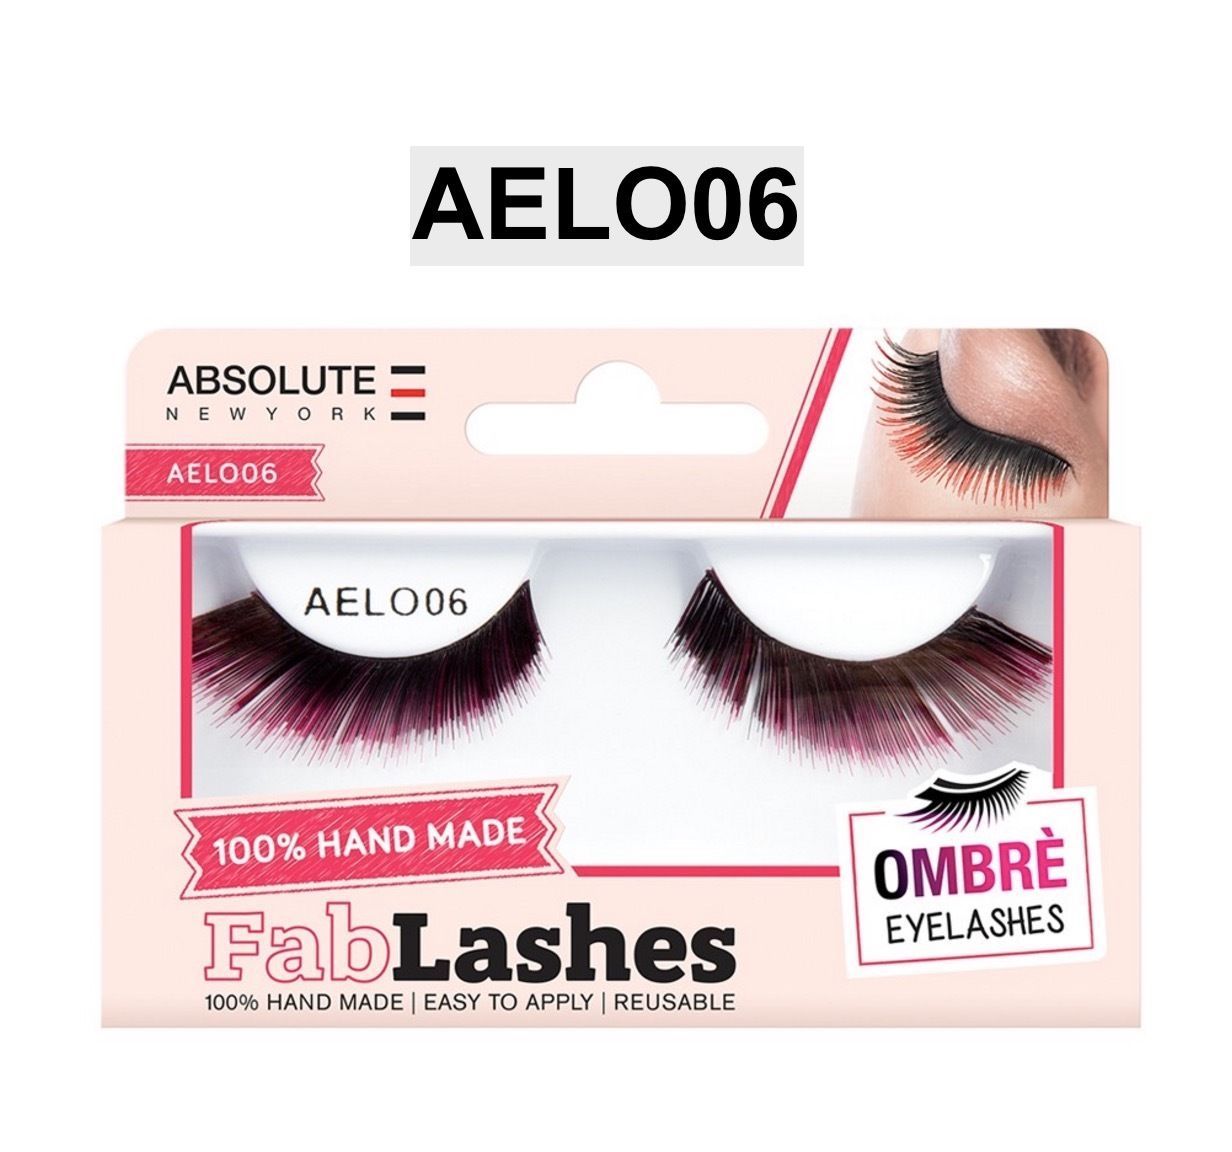 ABSOLUTE NEW YORK 100% HAND MADE FAB LASHES OMBRE EYELASHES AELO06 - $1.99